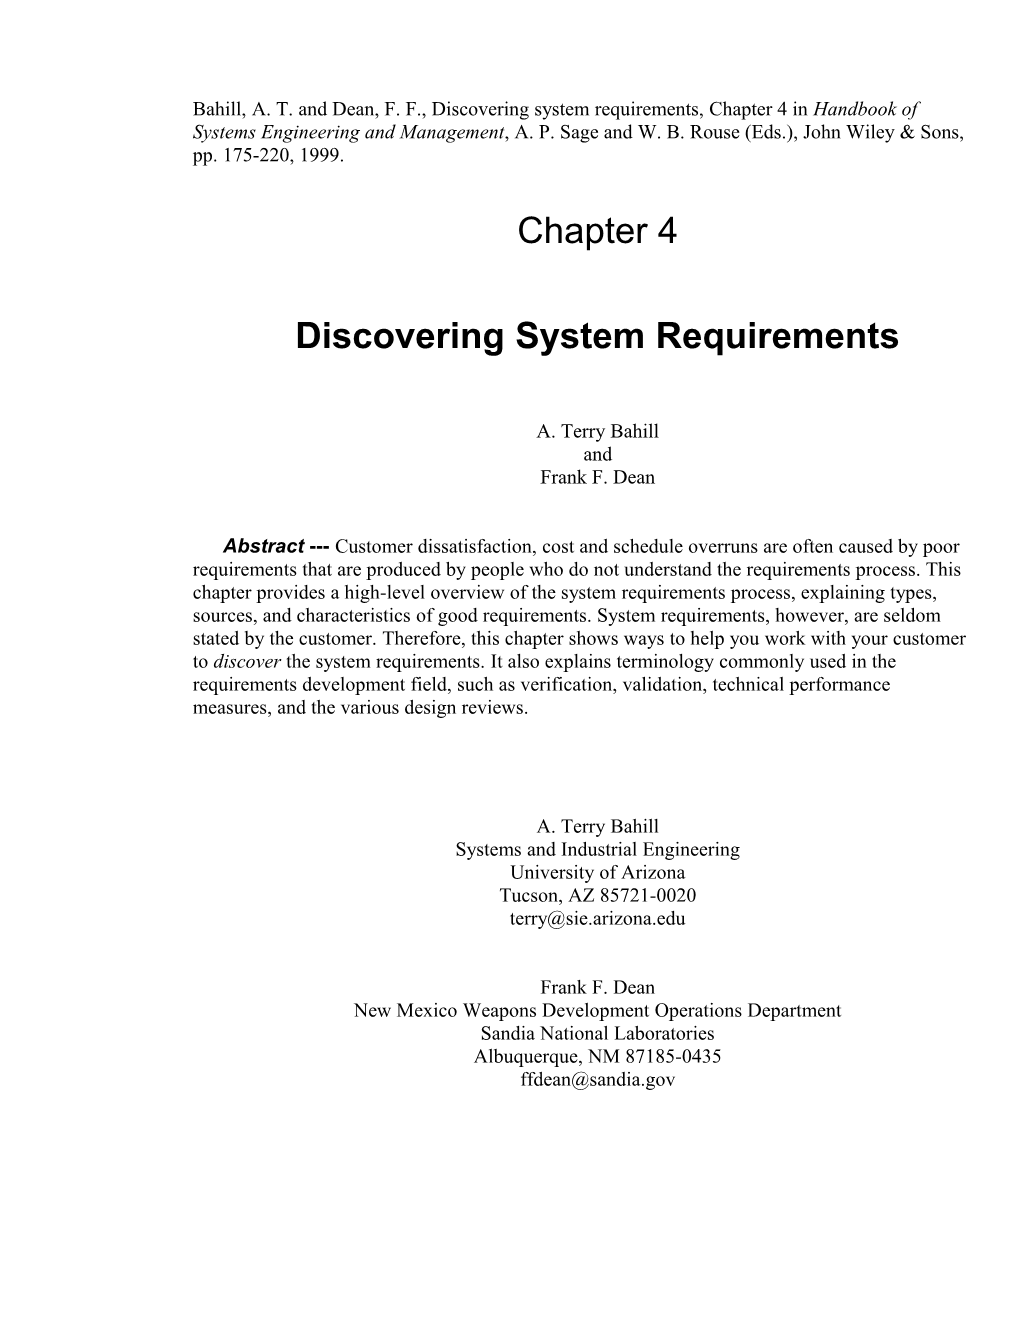 1 Discovering System Requirements